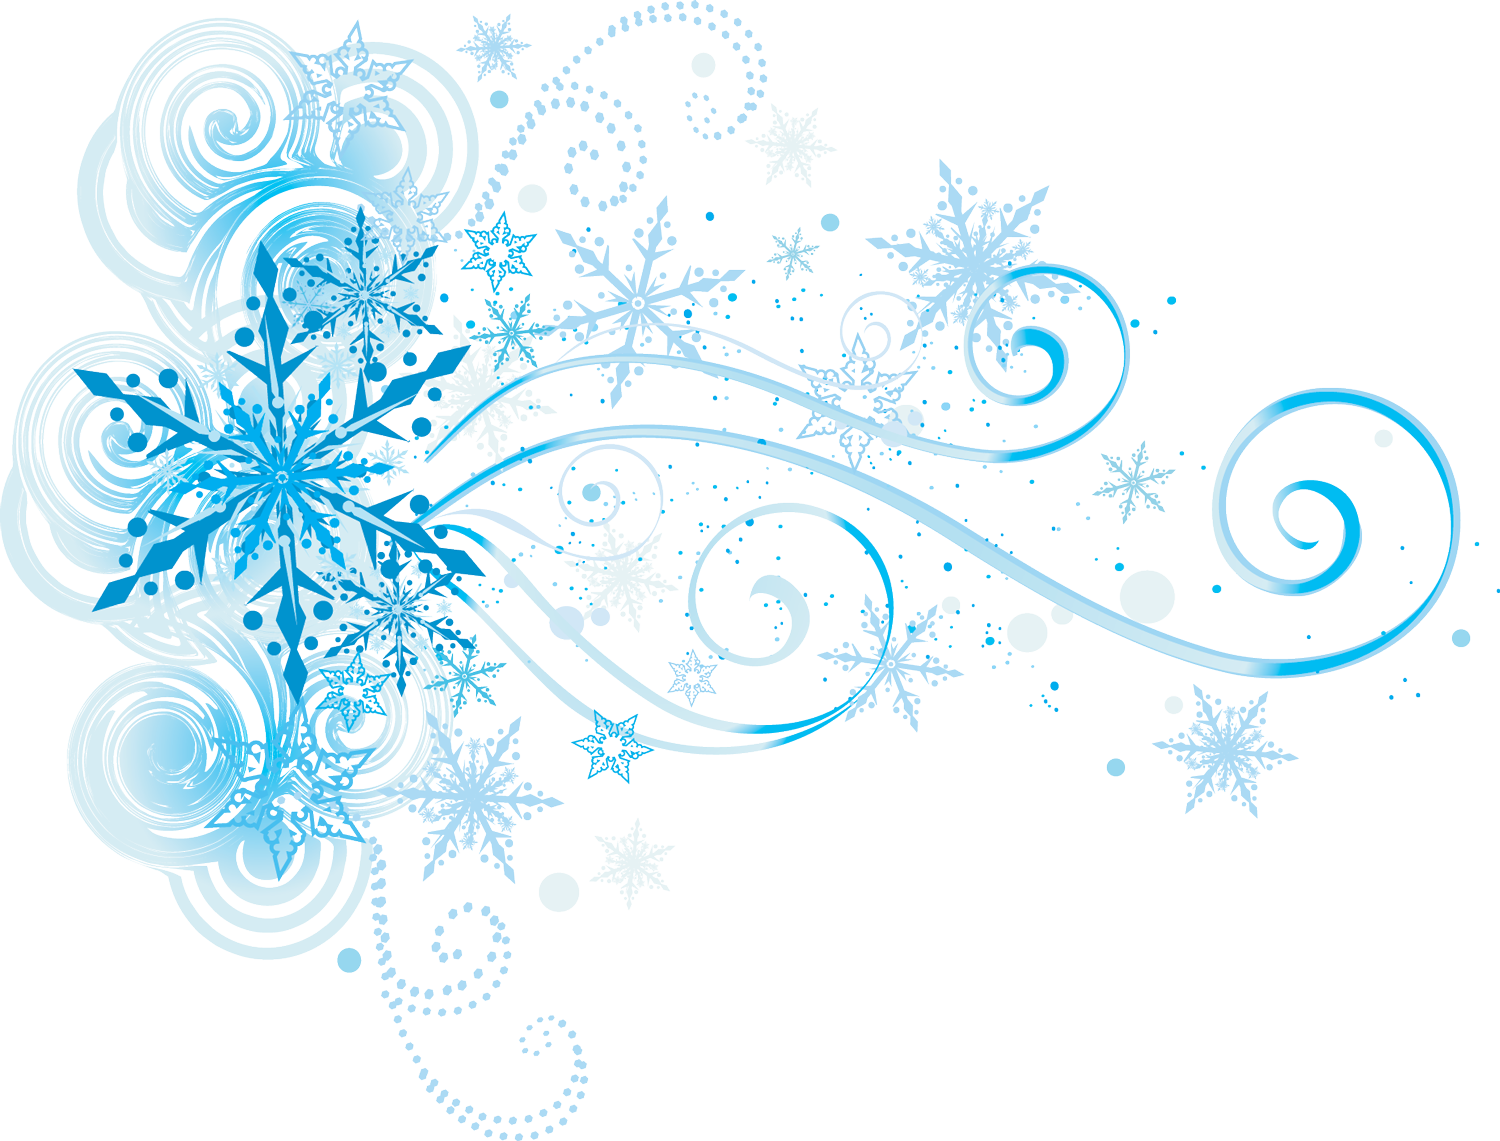 Garland clipart snow. Snowflakes png images transparent